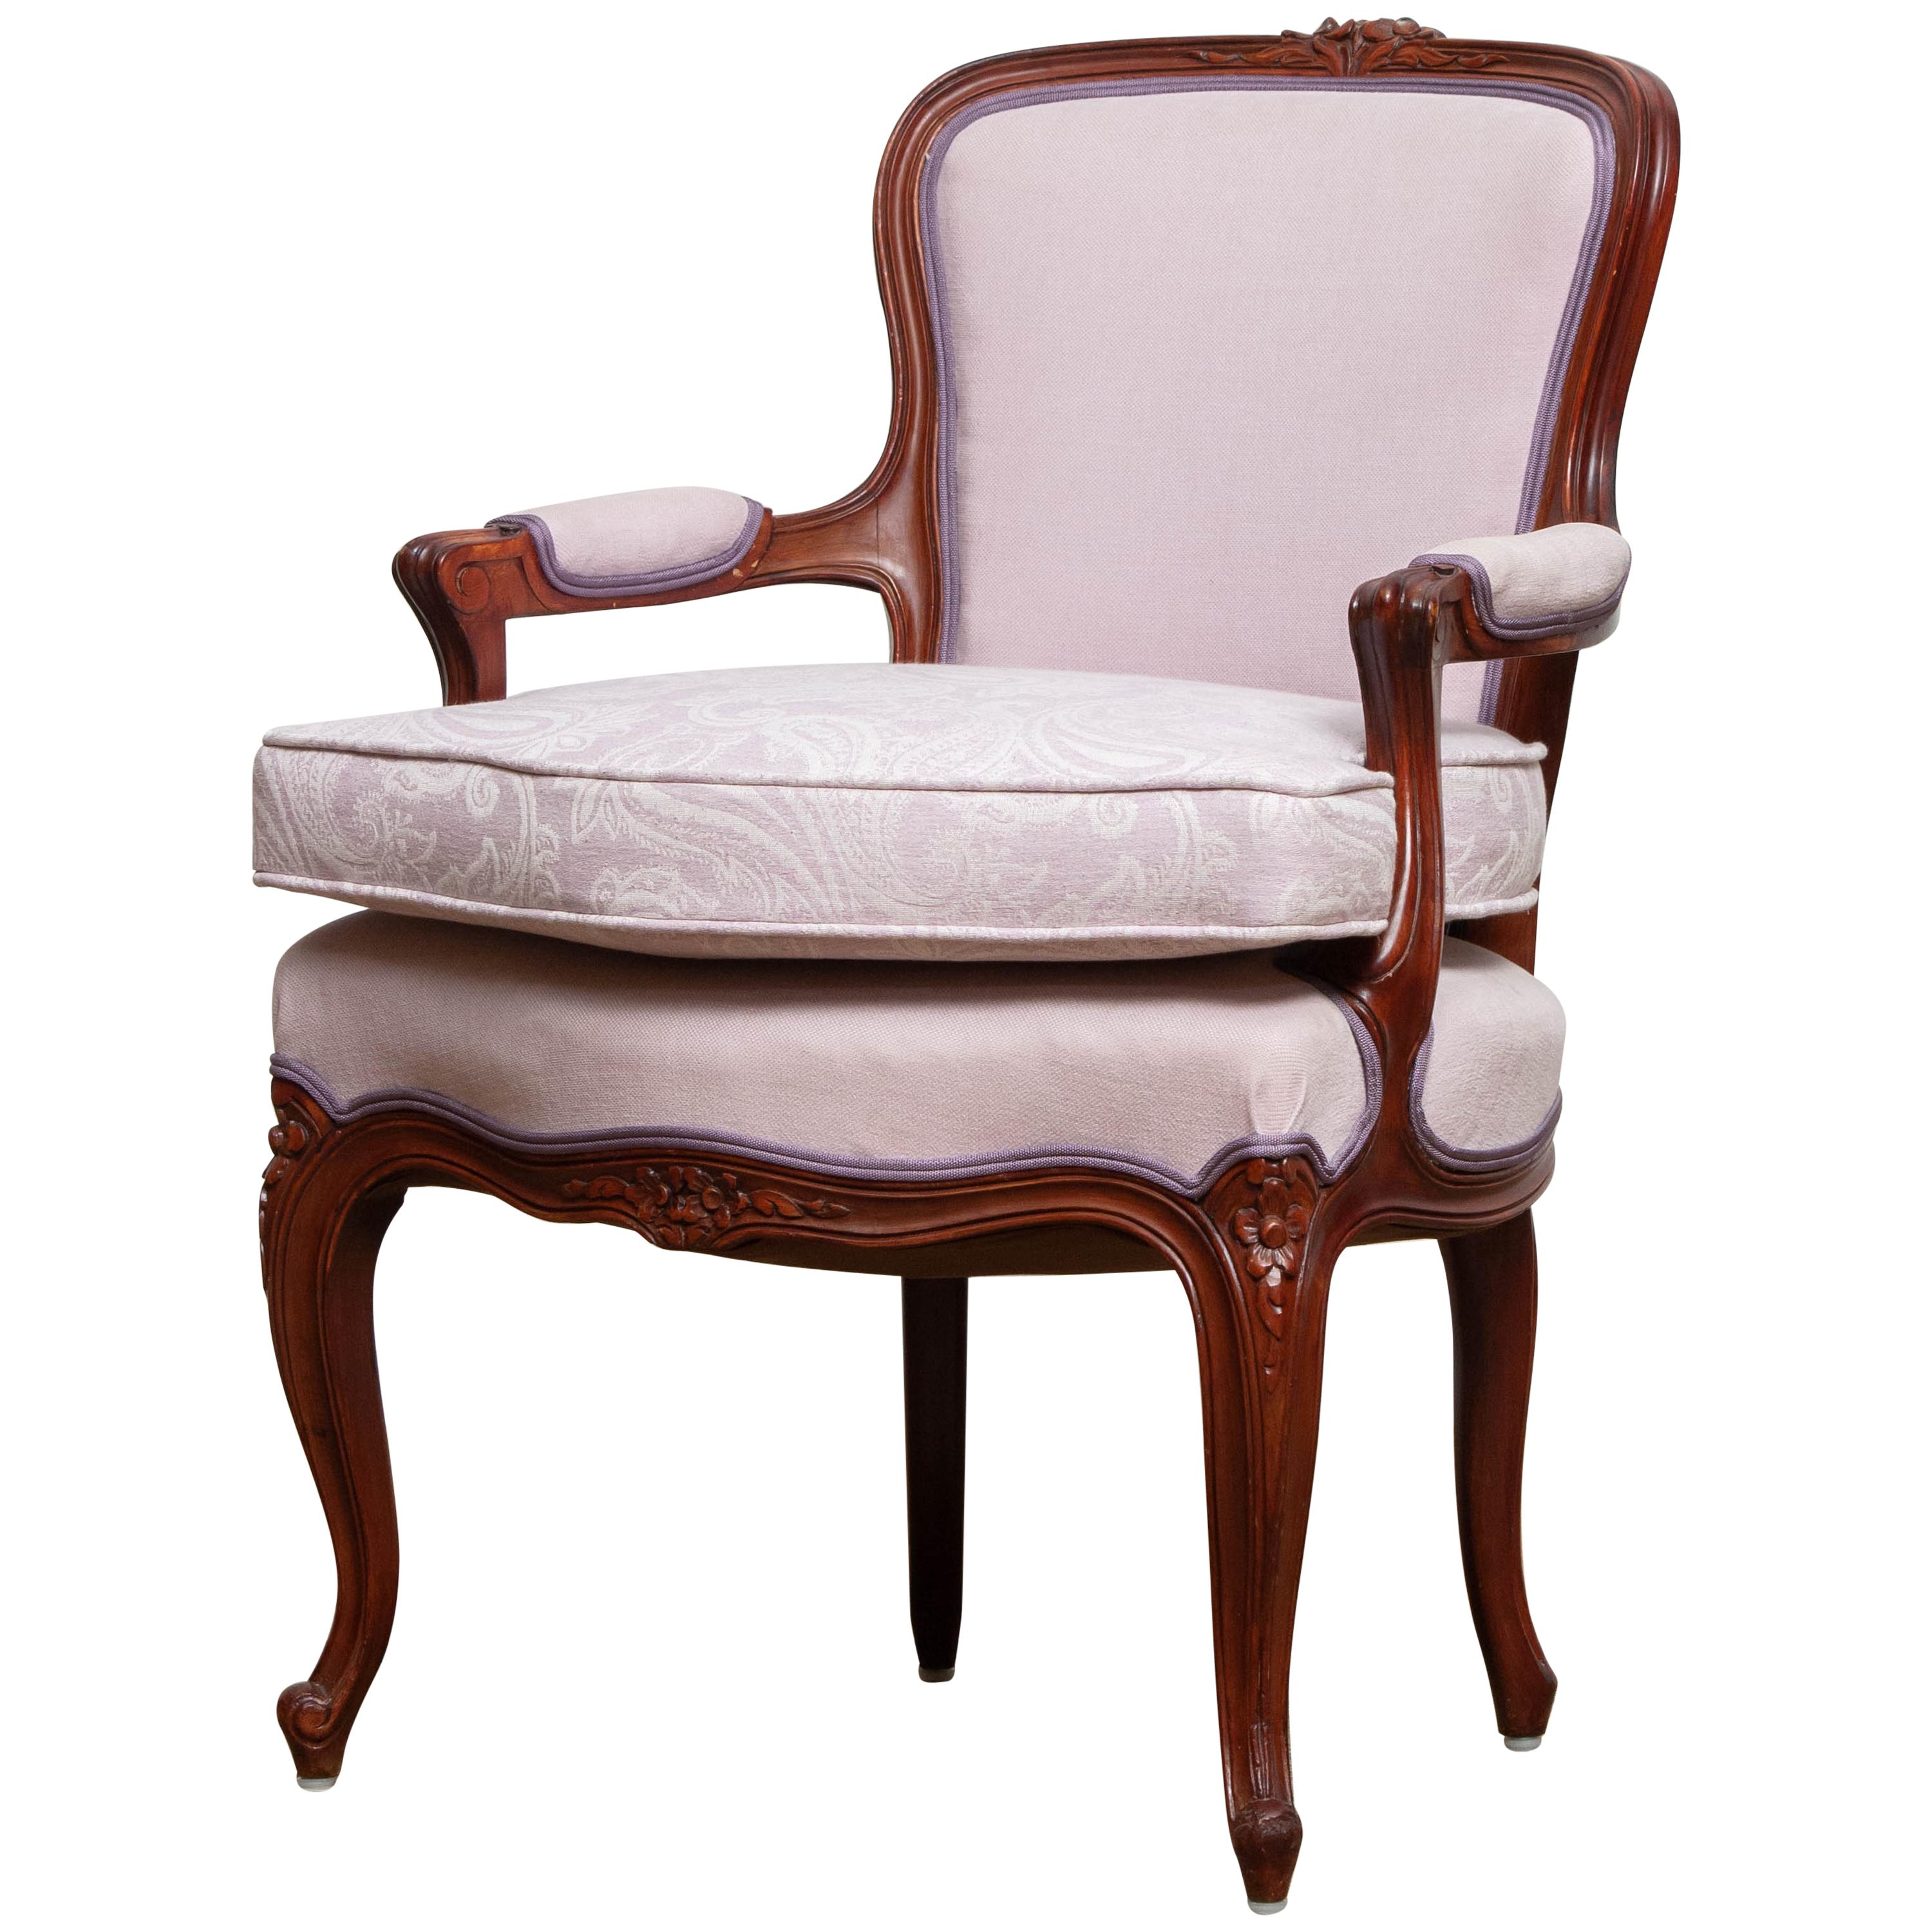 1950s, the Swedish Neo-Rococo, and finished in the shabby chic technique armchair is in perfect condition. Upholstered in pink fabric and an extra cushion for extra comfort also in pink jacquard. Measures: Seat height with the extra cushion is: